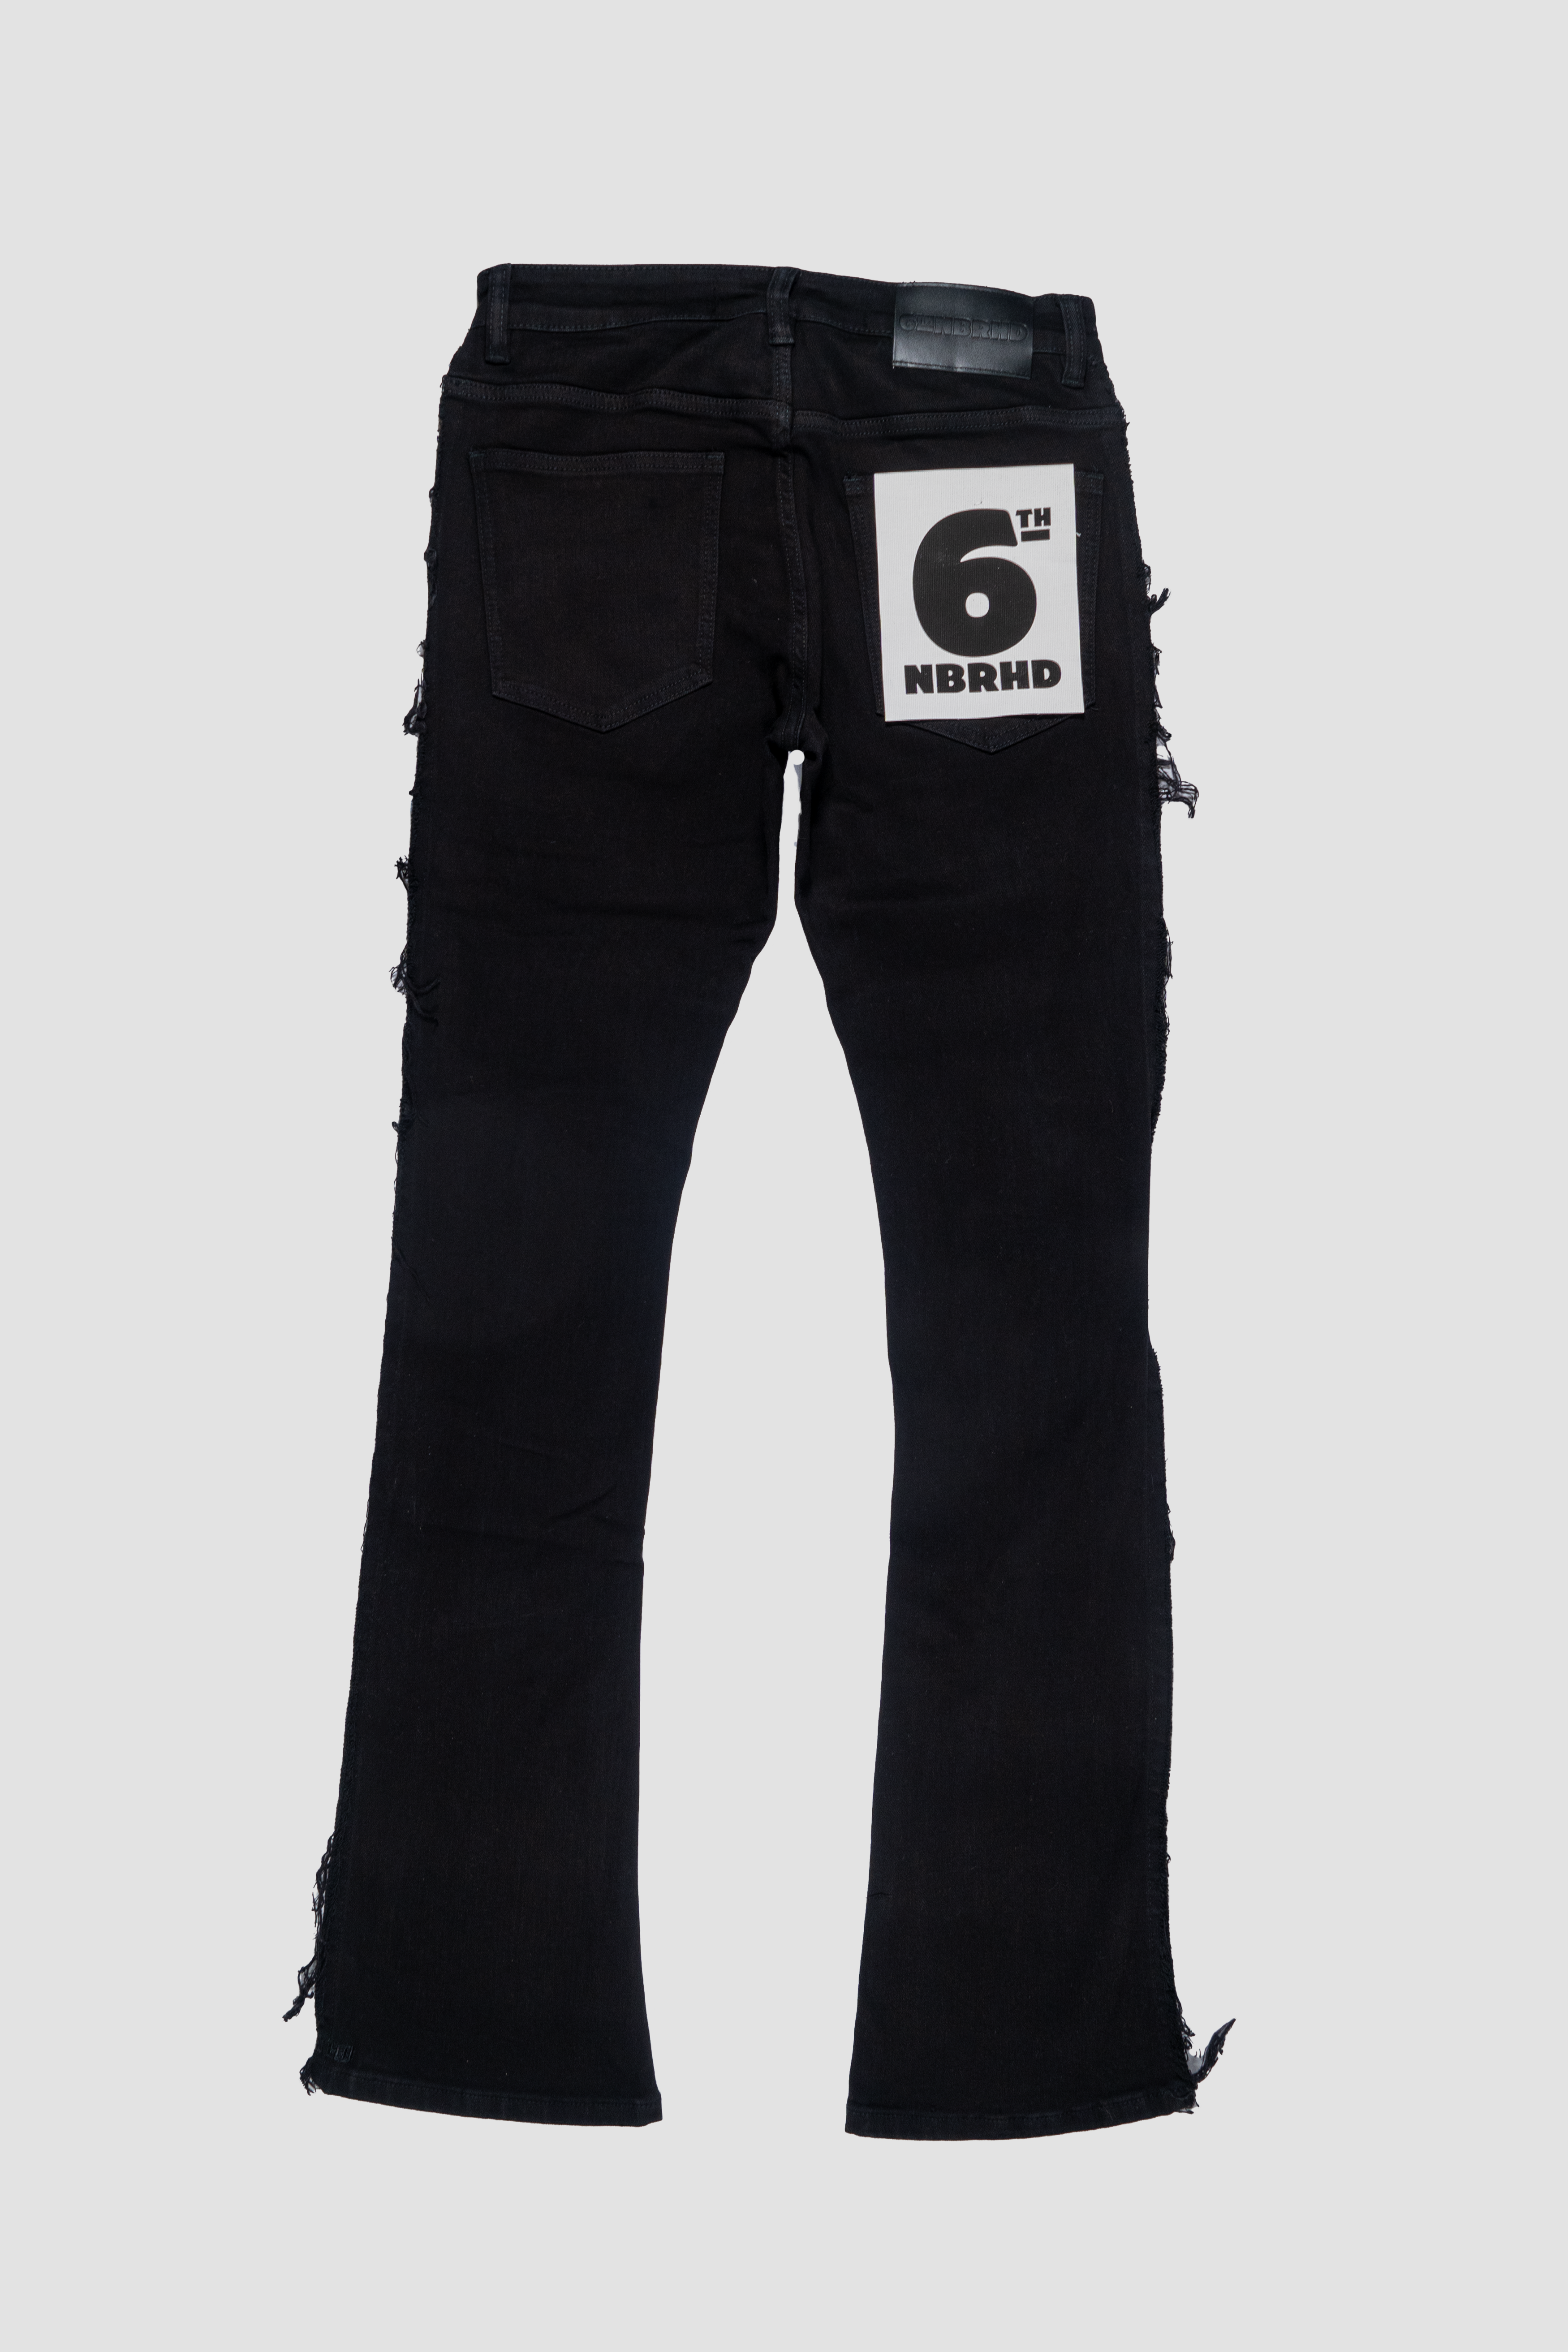 6thNBRHD STACKED "RECONSTRUCT" -BLACK